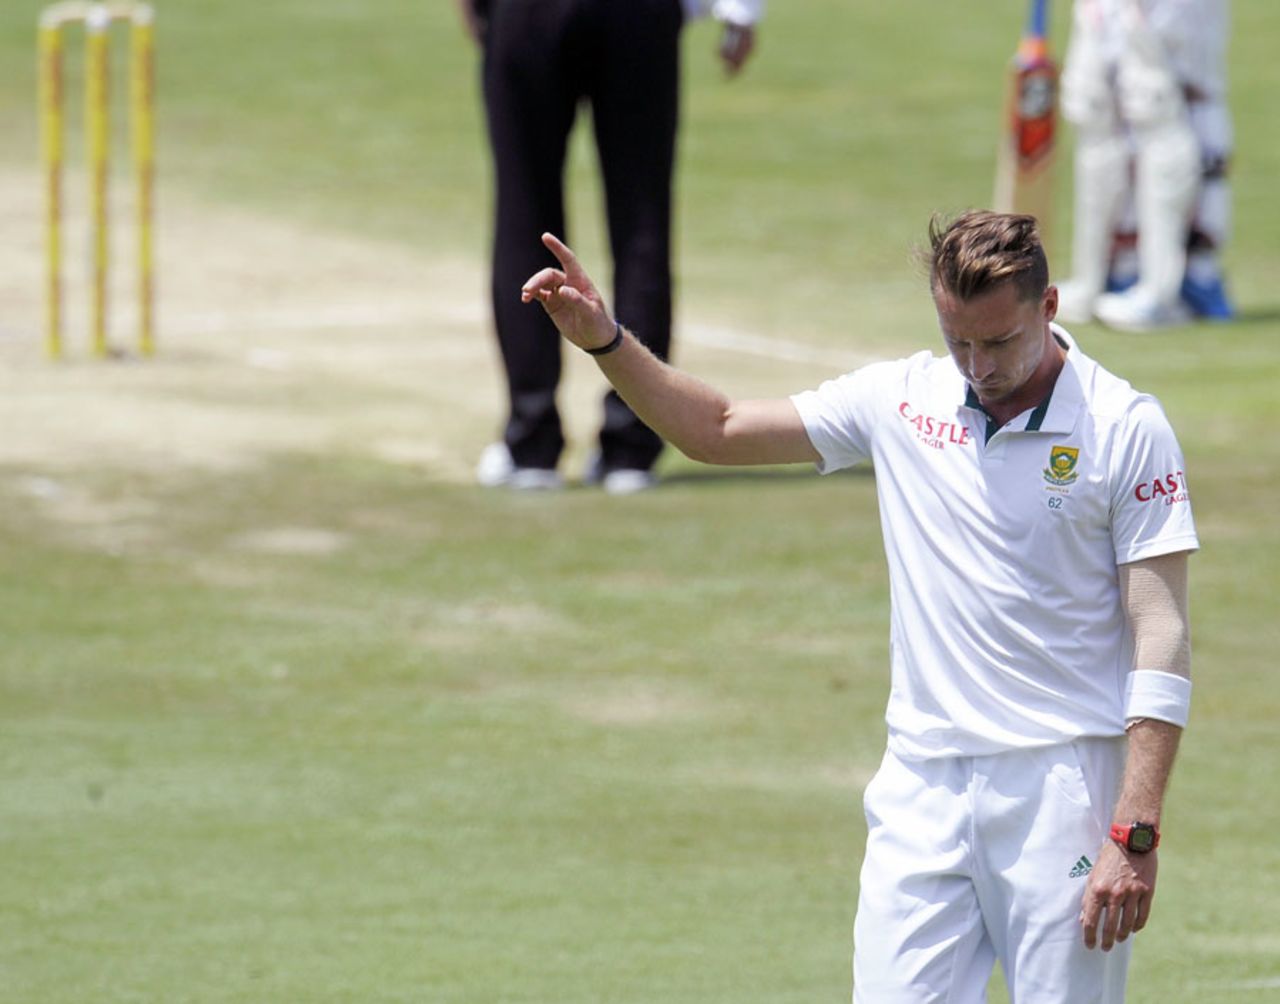 Dale Steyn acknowledges the applause after taking his fifth wicket, South Africa v West Indies, 1st Test, Centurion, 4th day, December 20, 2014